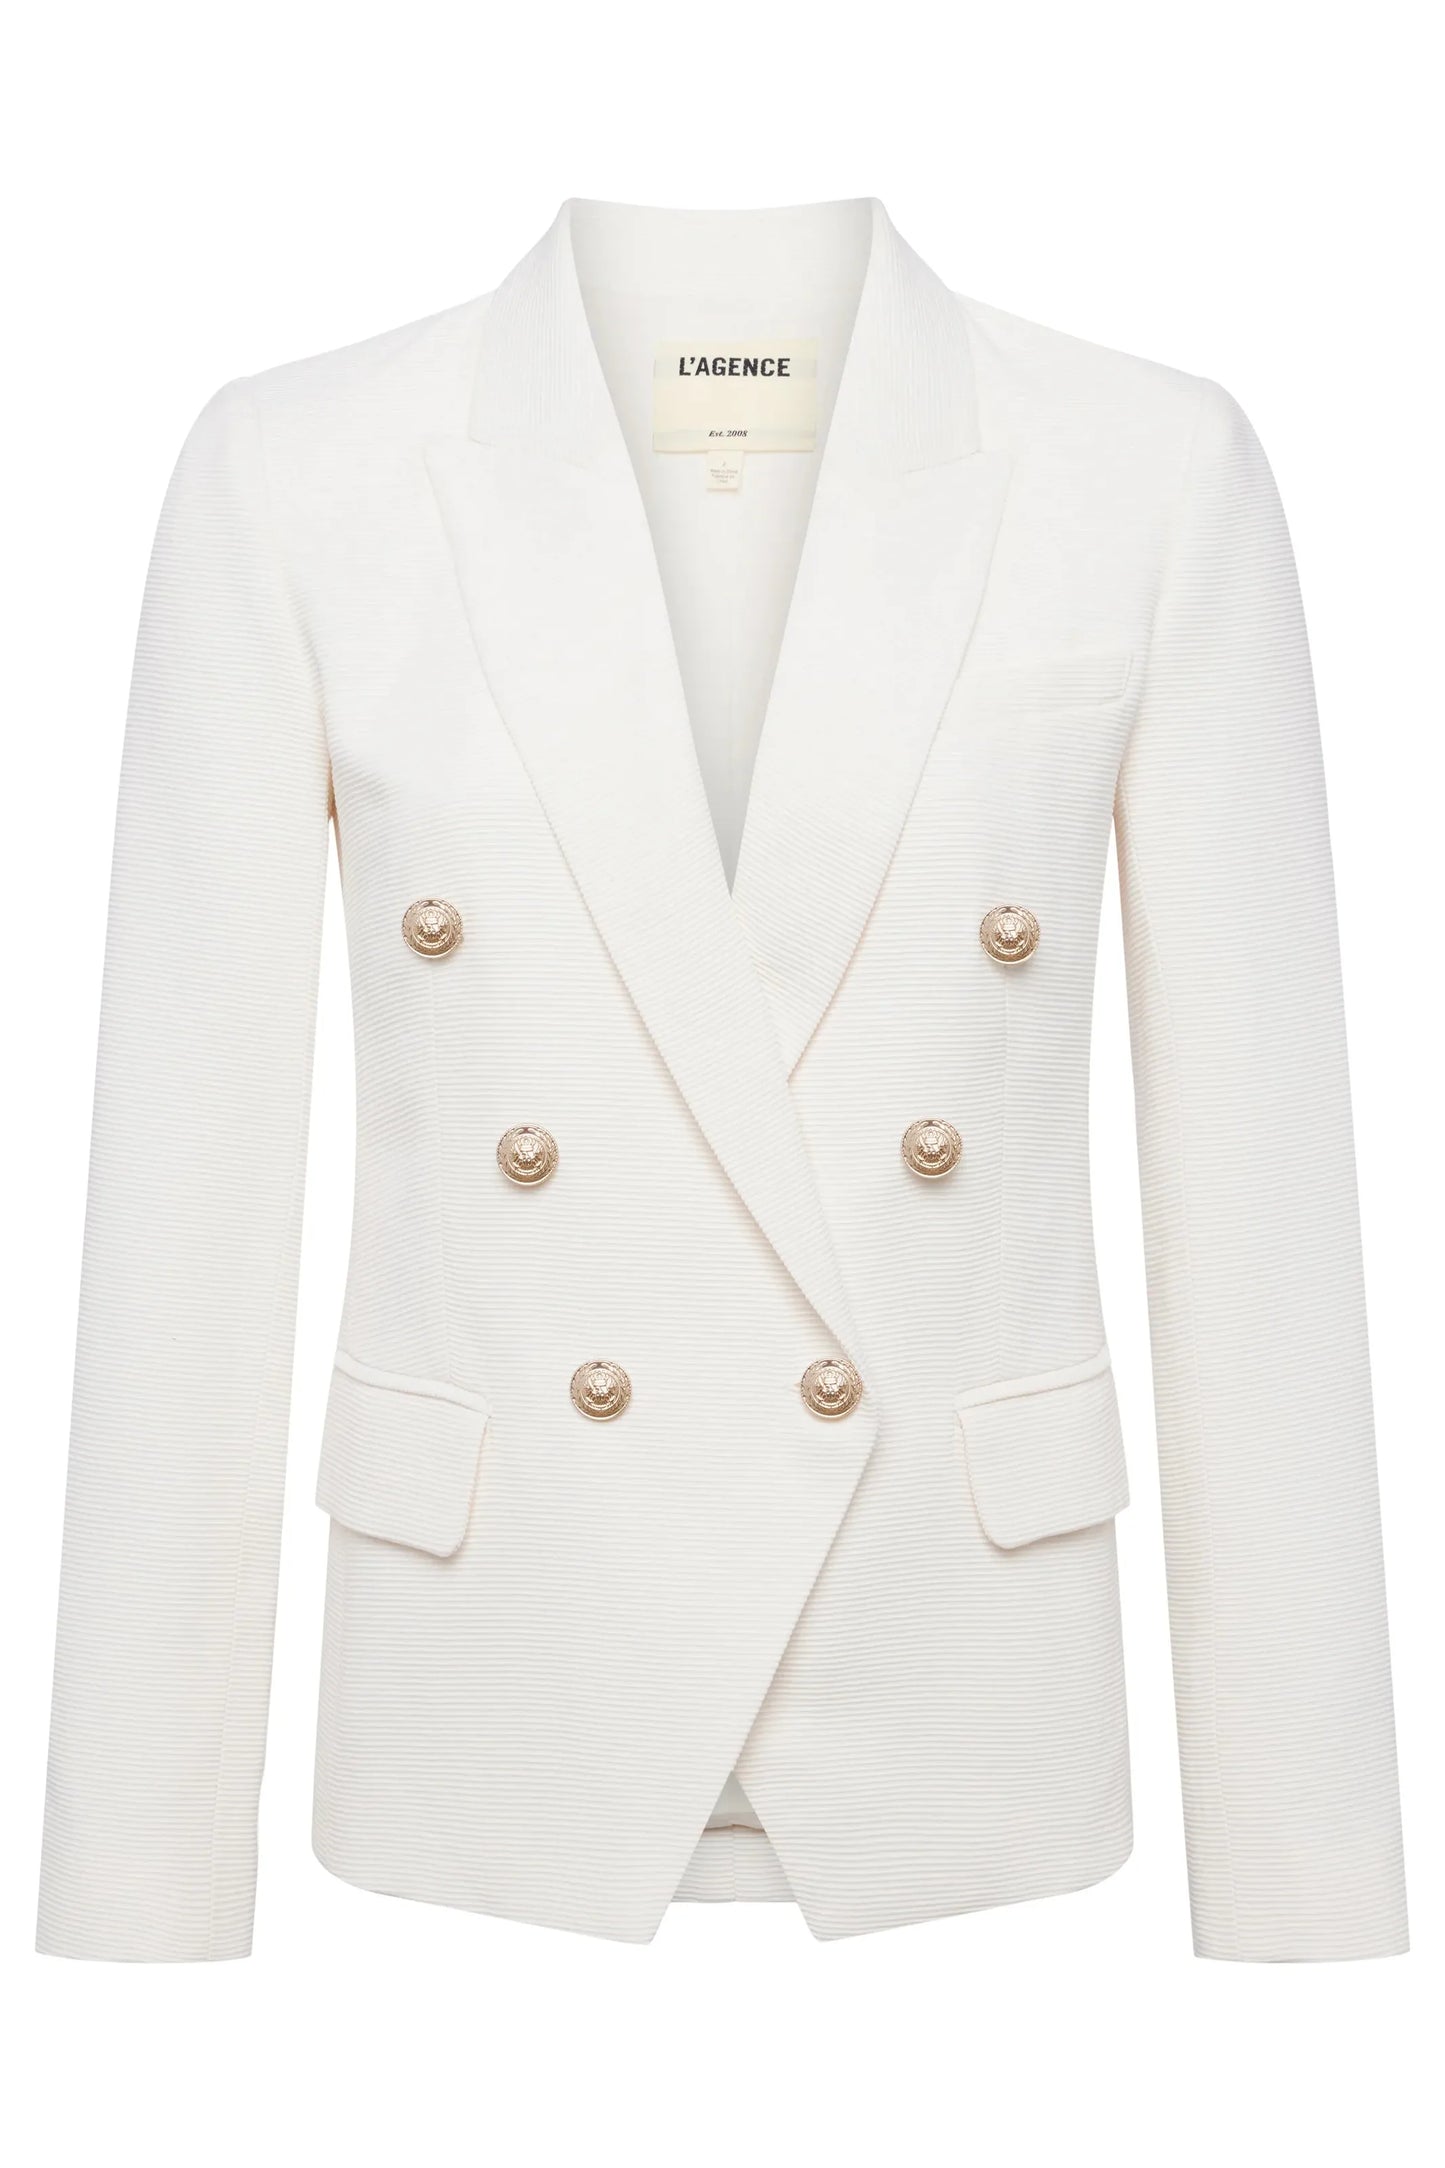 L'AGENCE - Kenzie Double Breasted Blazer in Ivory and Pearl Silver